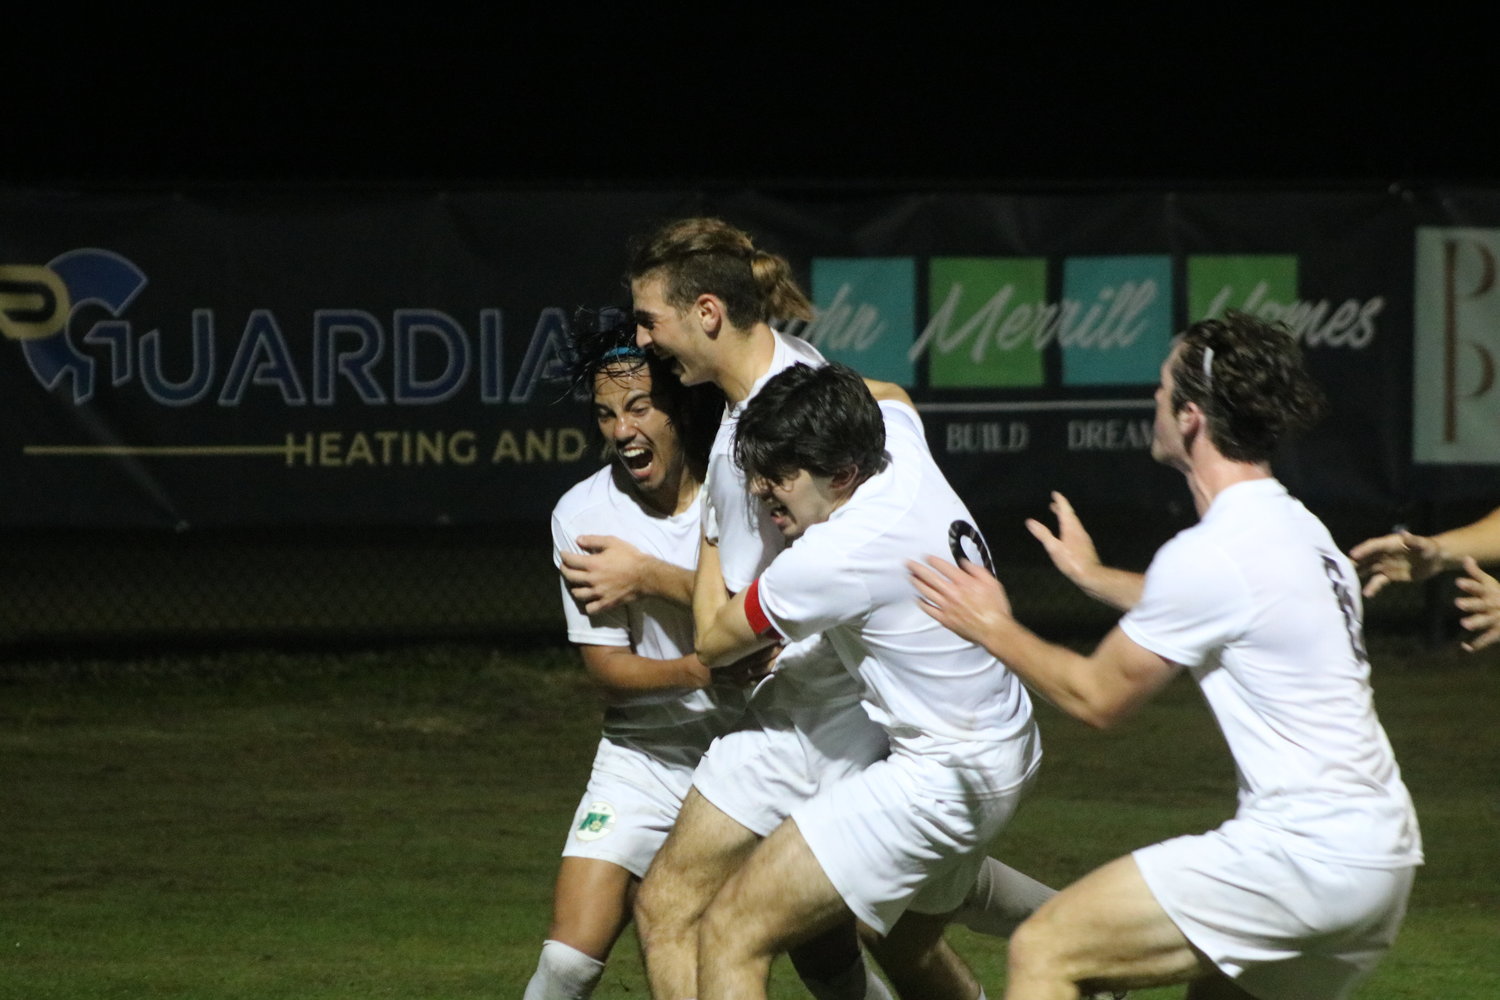 Nease’s Tyler Ghazanfari (middle) is swarmed by teammates after scoring the game-tying goal in the 73rd minute against Ponte Vedra on Dec. 7.